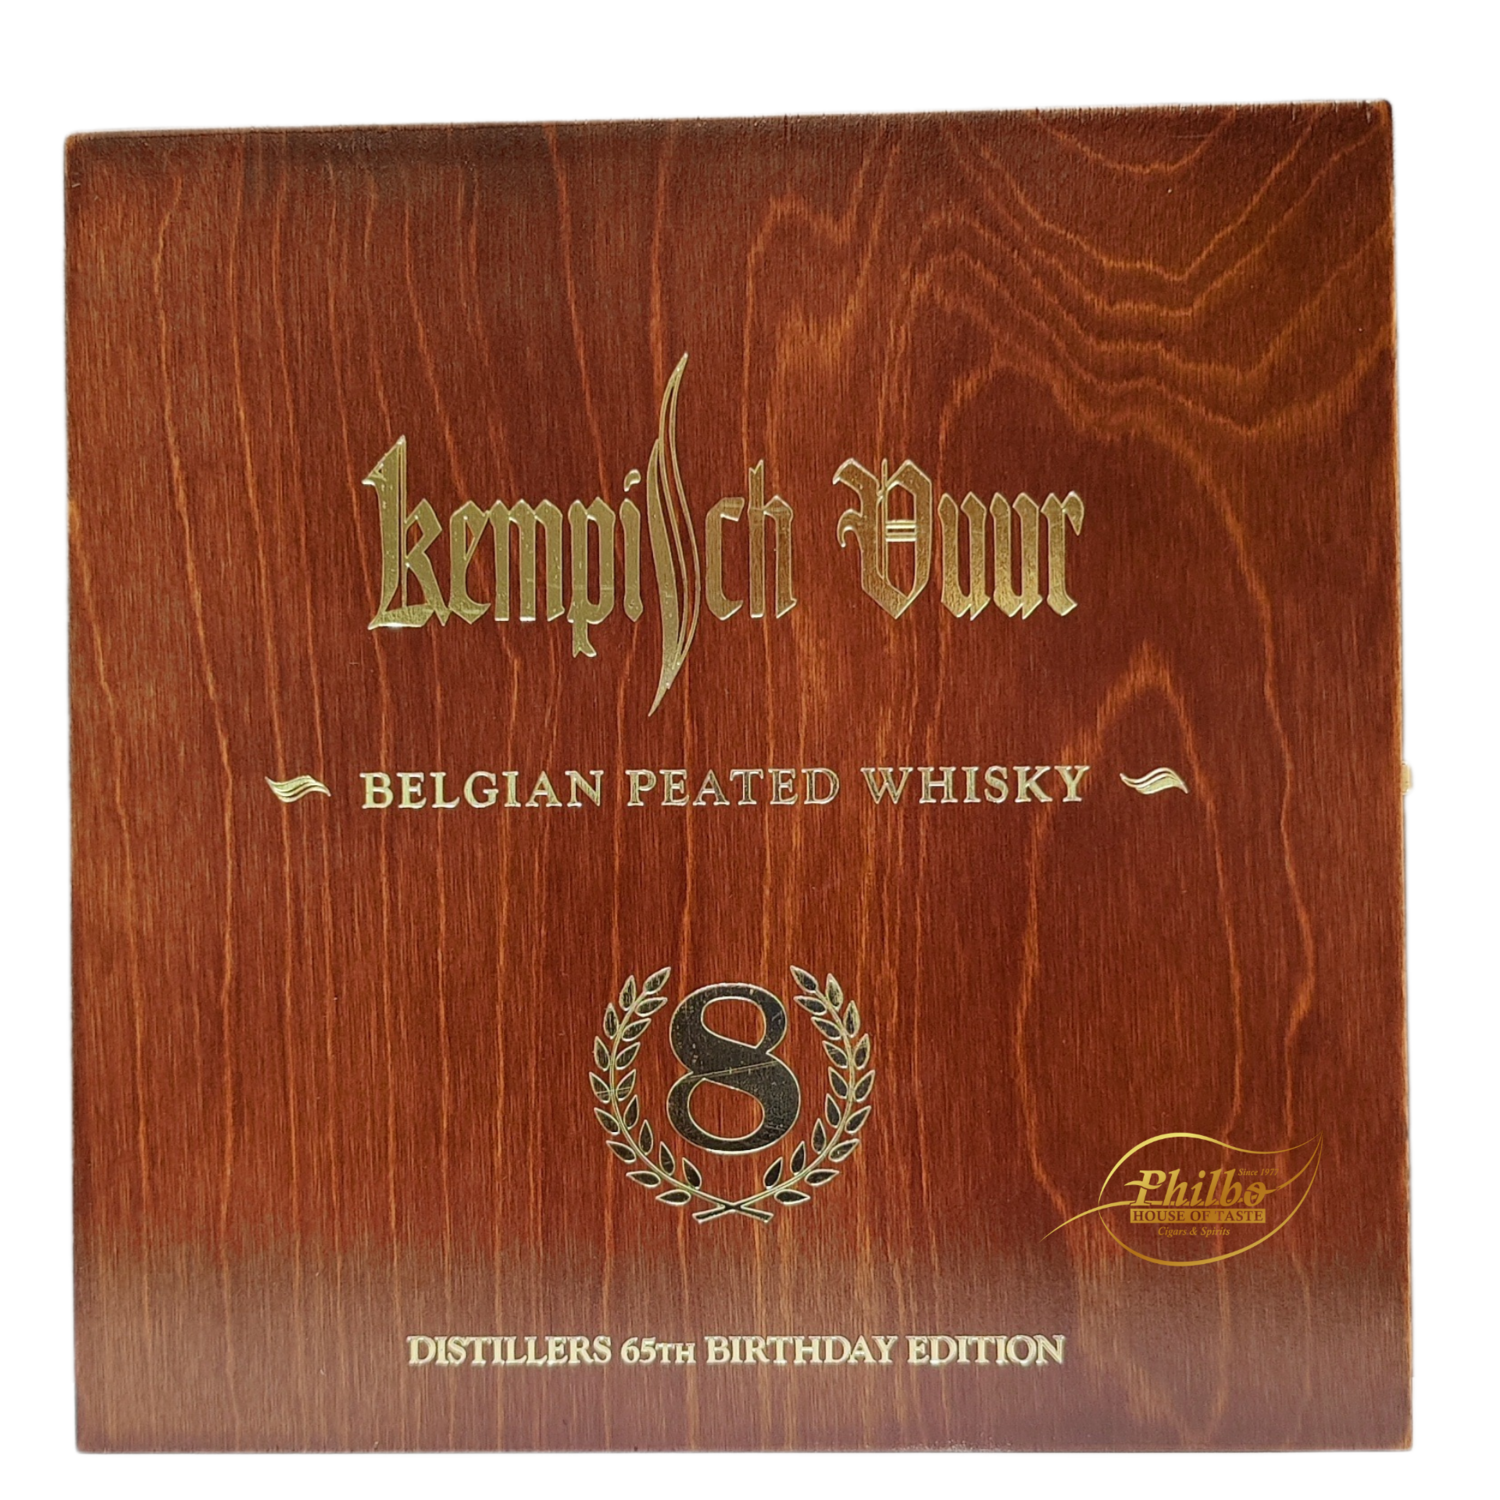 Kempisch Vuur- Belgian Peated Whisky 8Y - 50cl / 46° DISTILLERS 65TH BIRHTDAY EDITION only 191 bottles